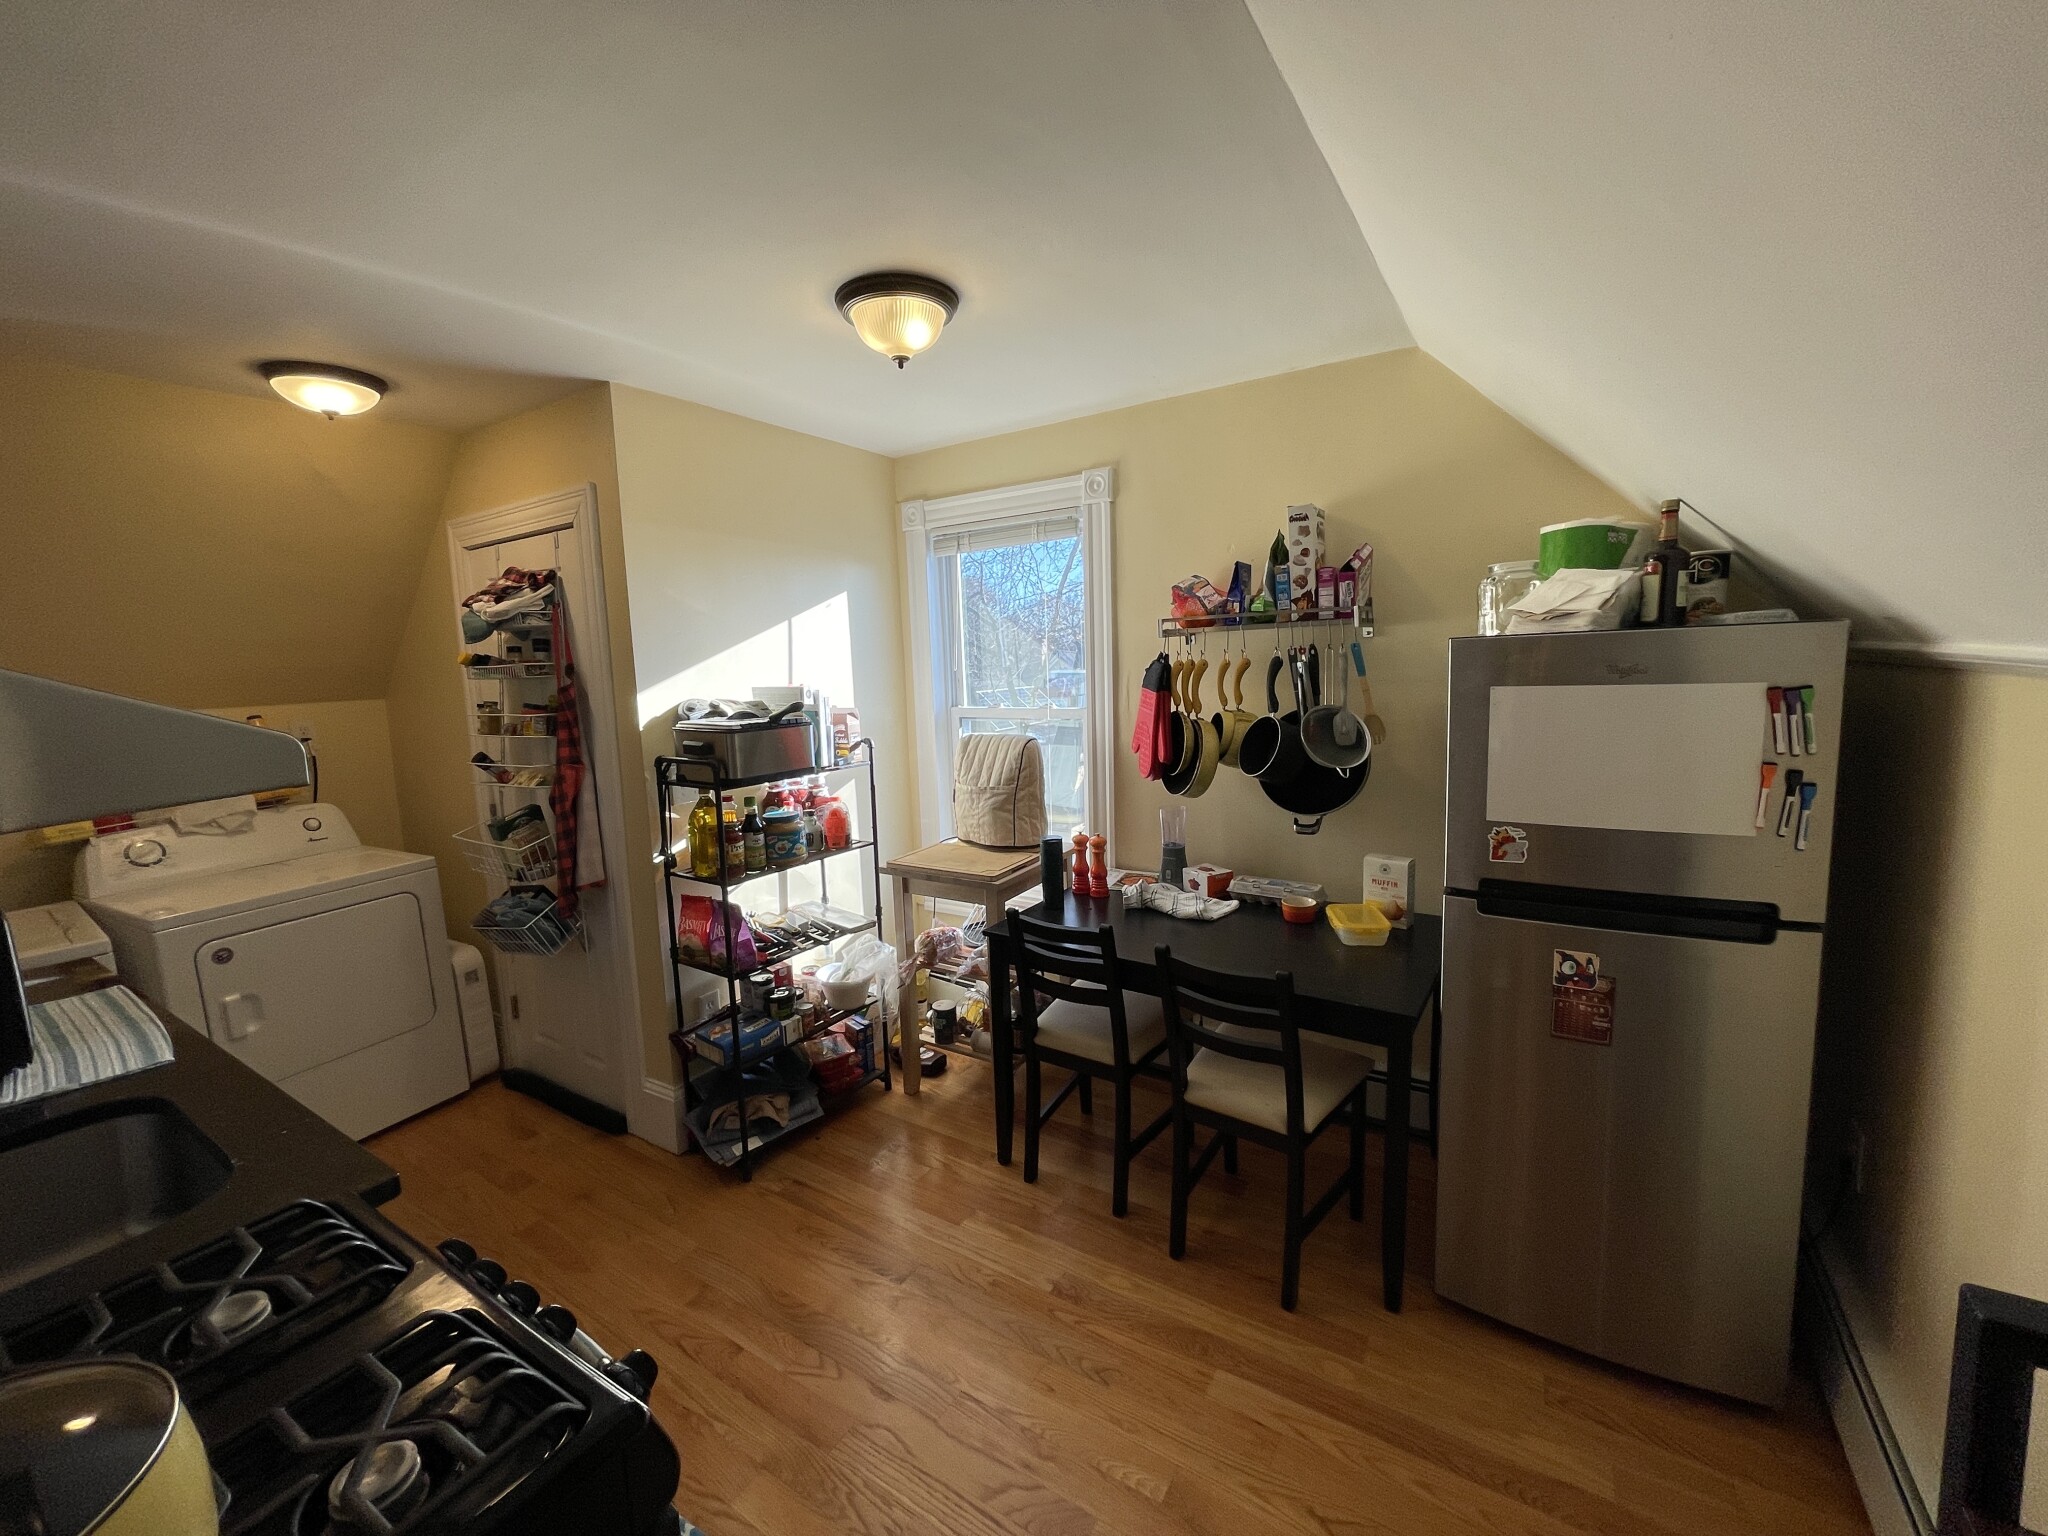 Photos of apartment on Irving St.,Somerville MA 02144